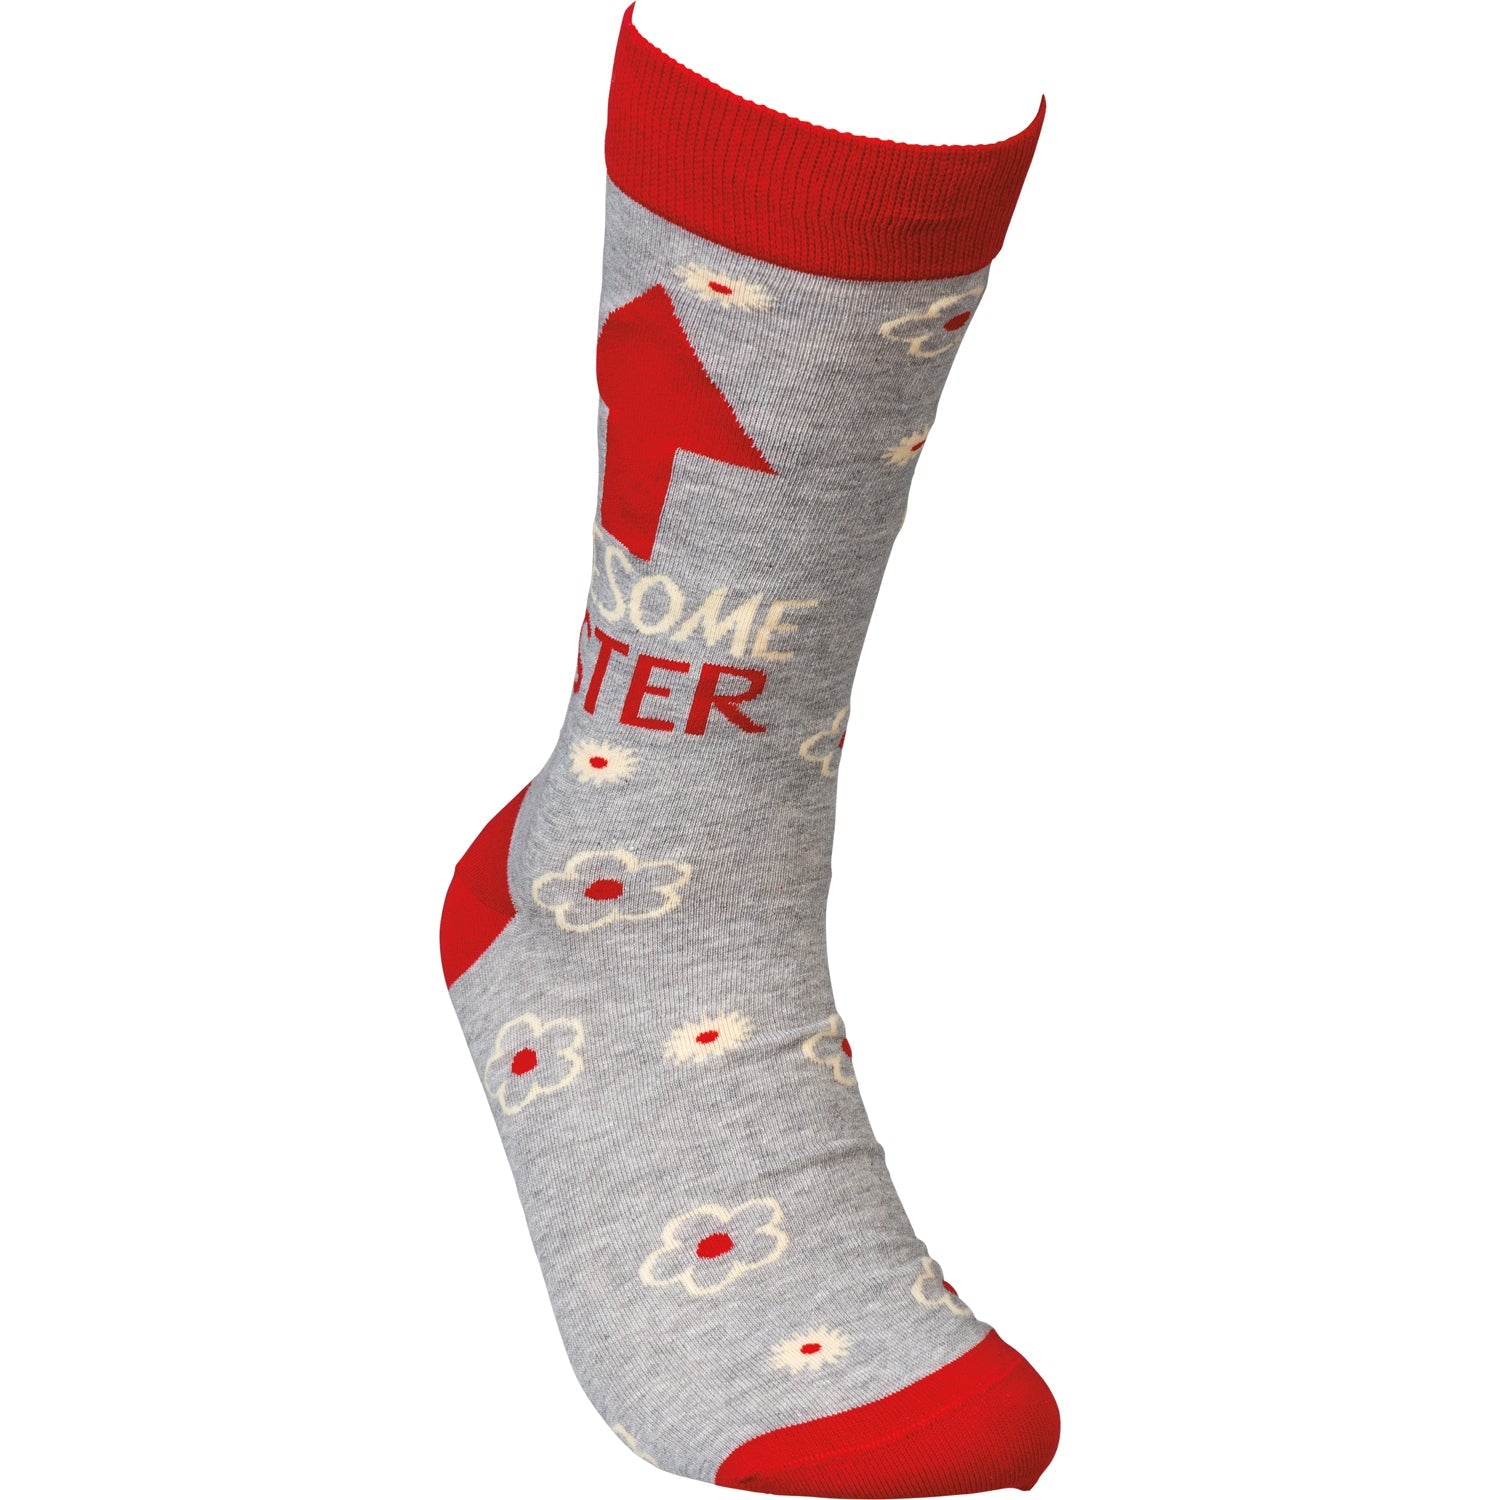 Awesome Sister Socks in Red and Gray